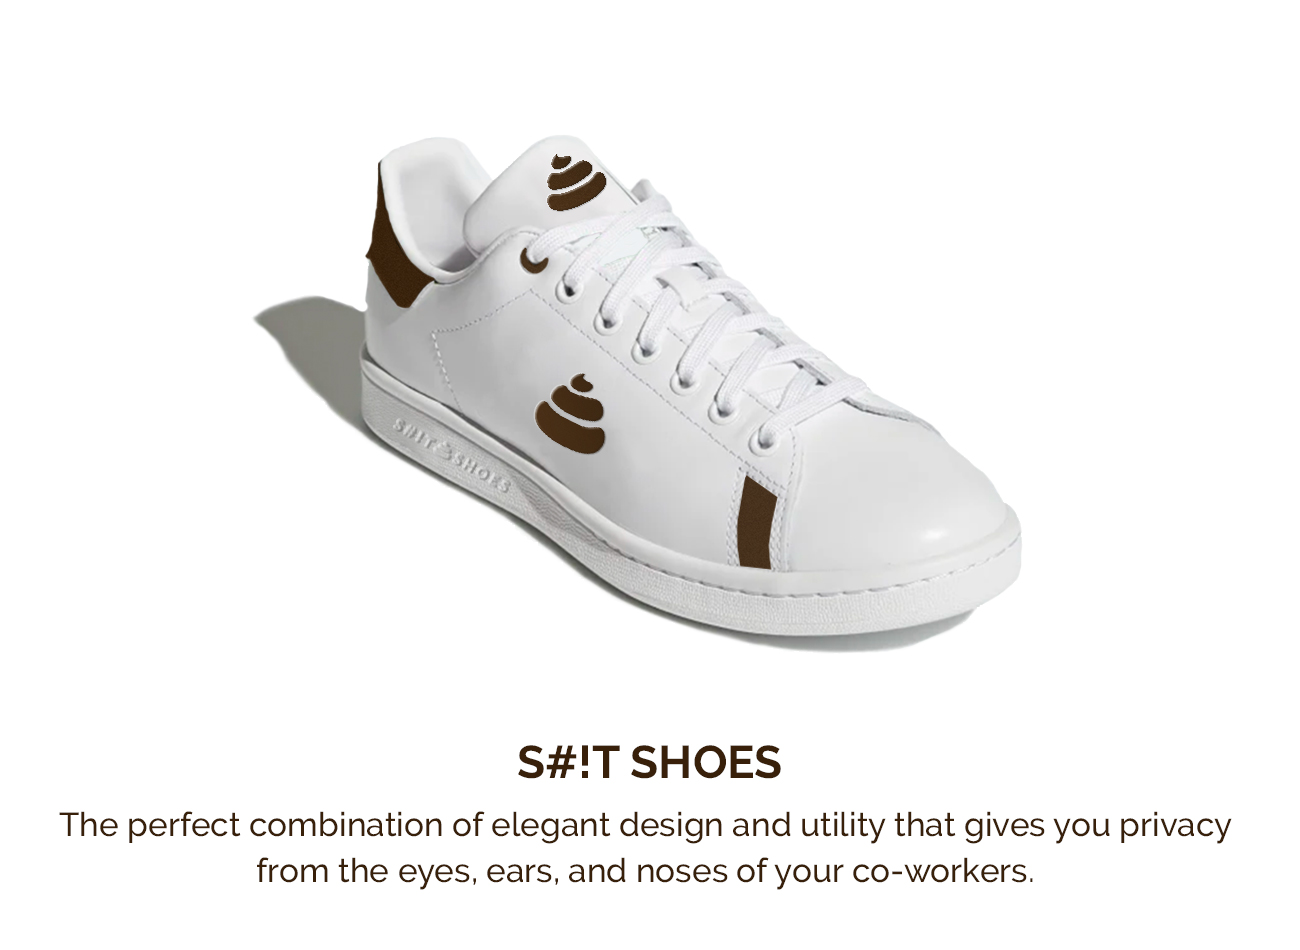 shoes-white-text.jpg